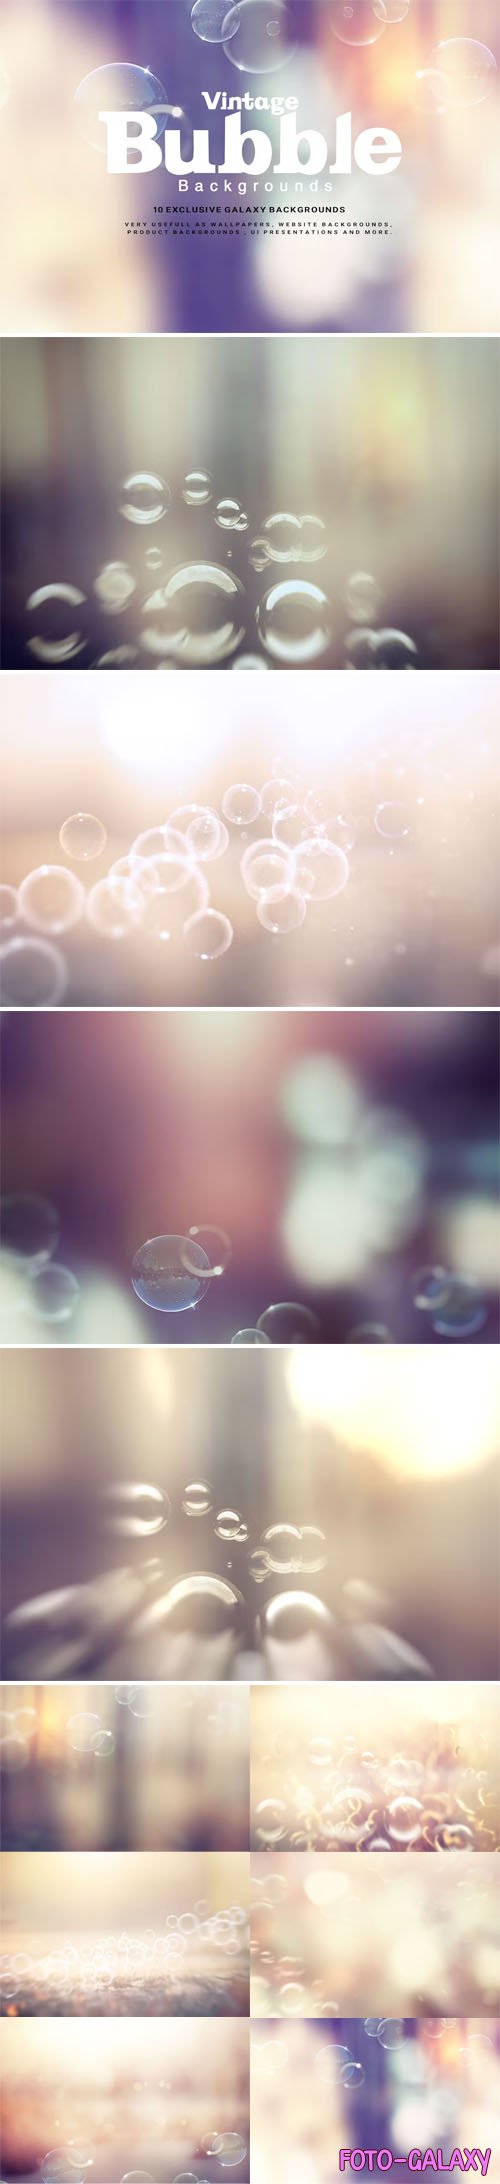 10 Vintage Bubble Overlays for Photoshop